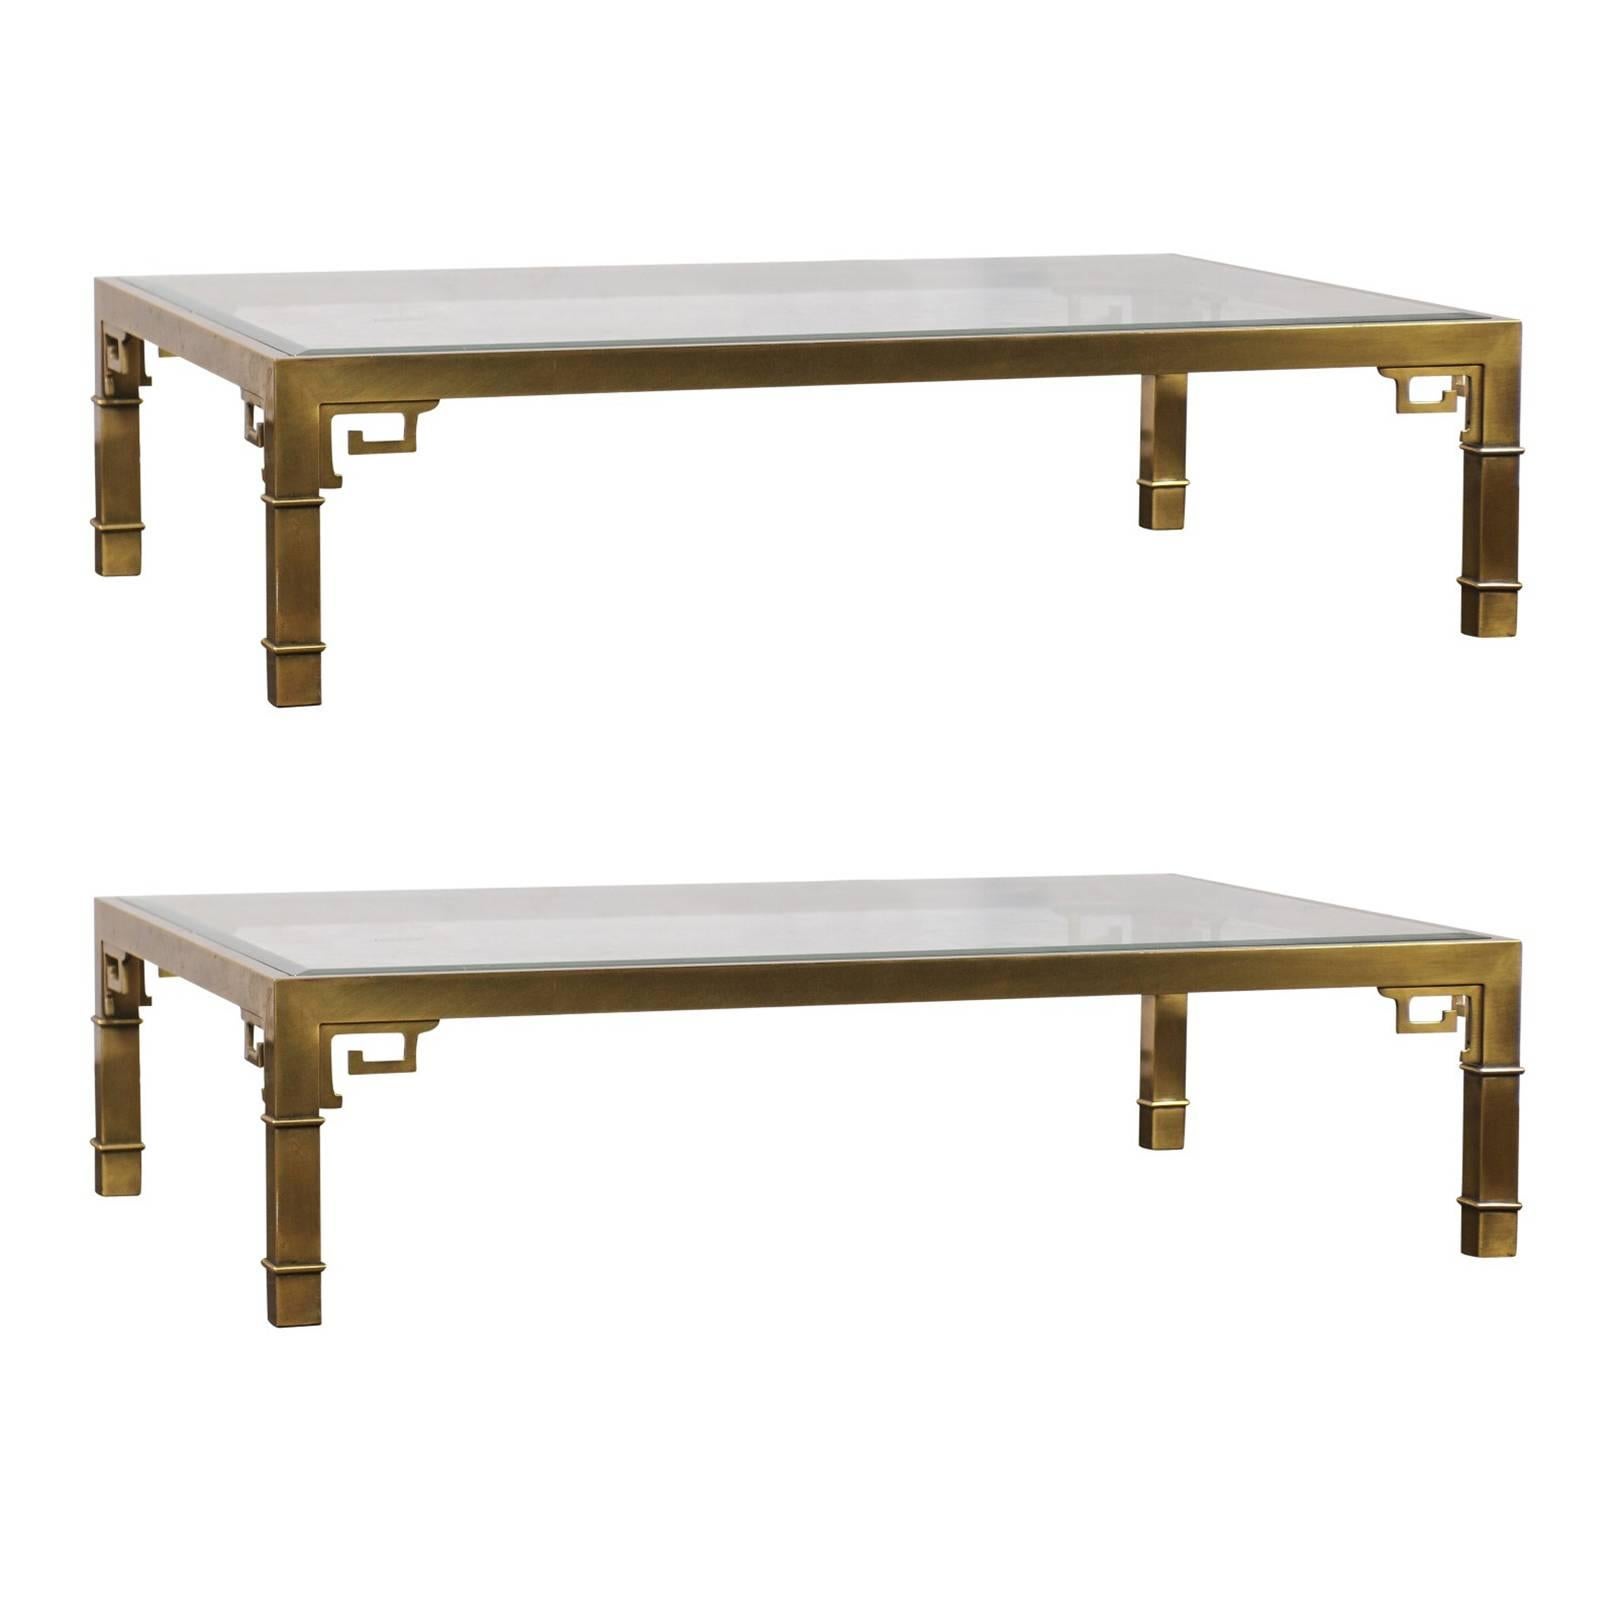 Pair of Mastercraft Chinese Polished Brass Greek Key Coffee Tables,  circa 1970s For Sale